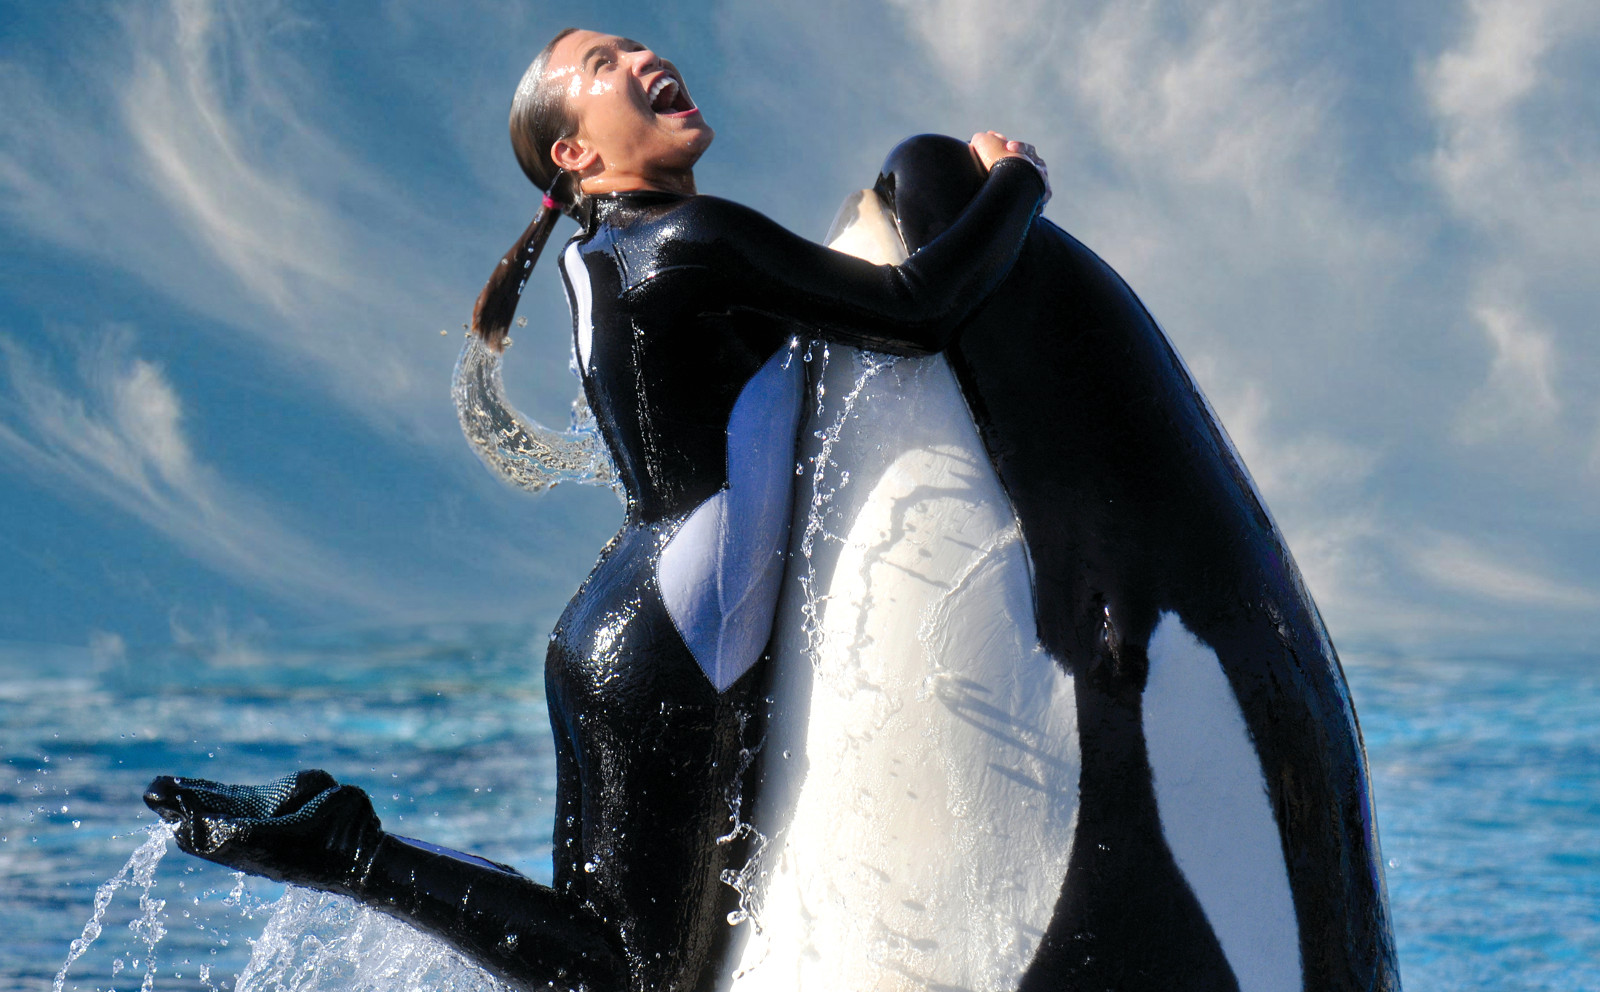 Empty the Tanks! SeaWorld's Comical Efforts to Redeem Their Reputation